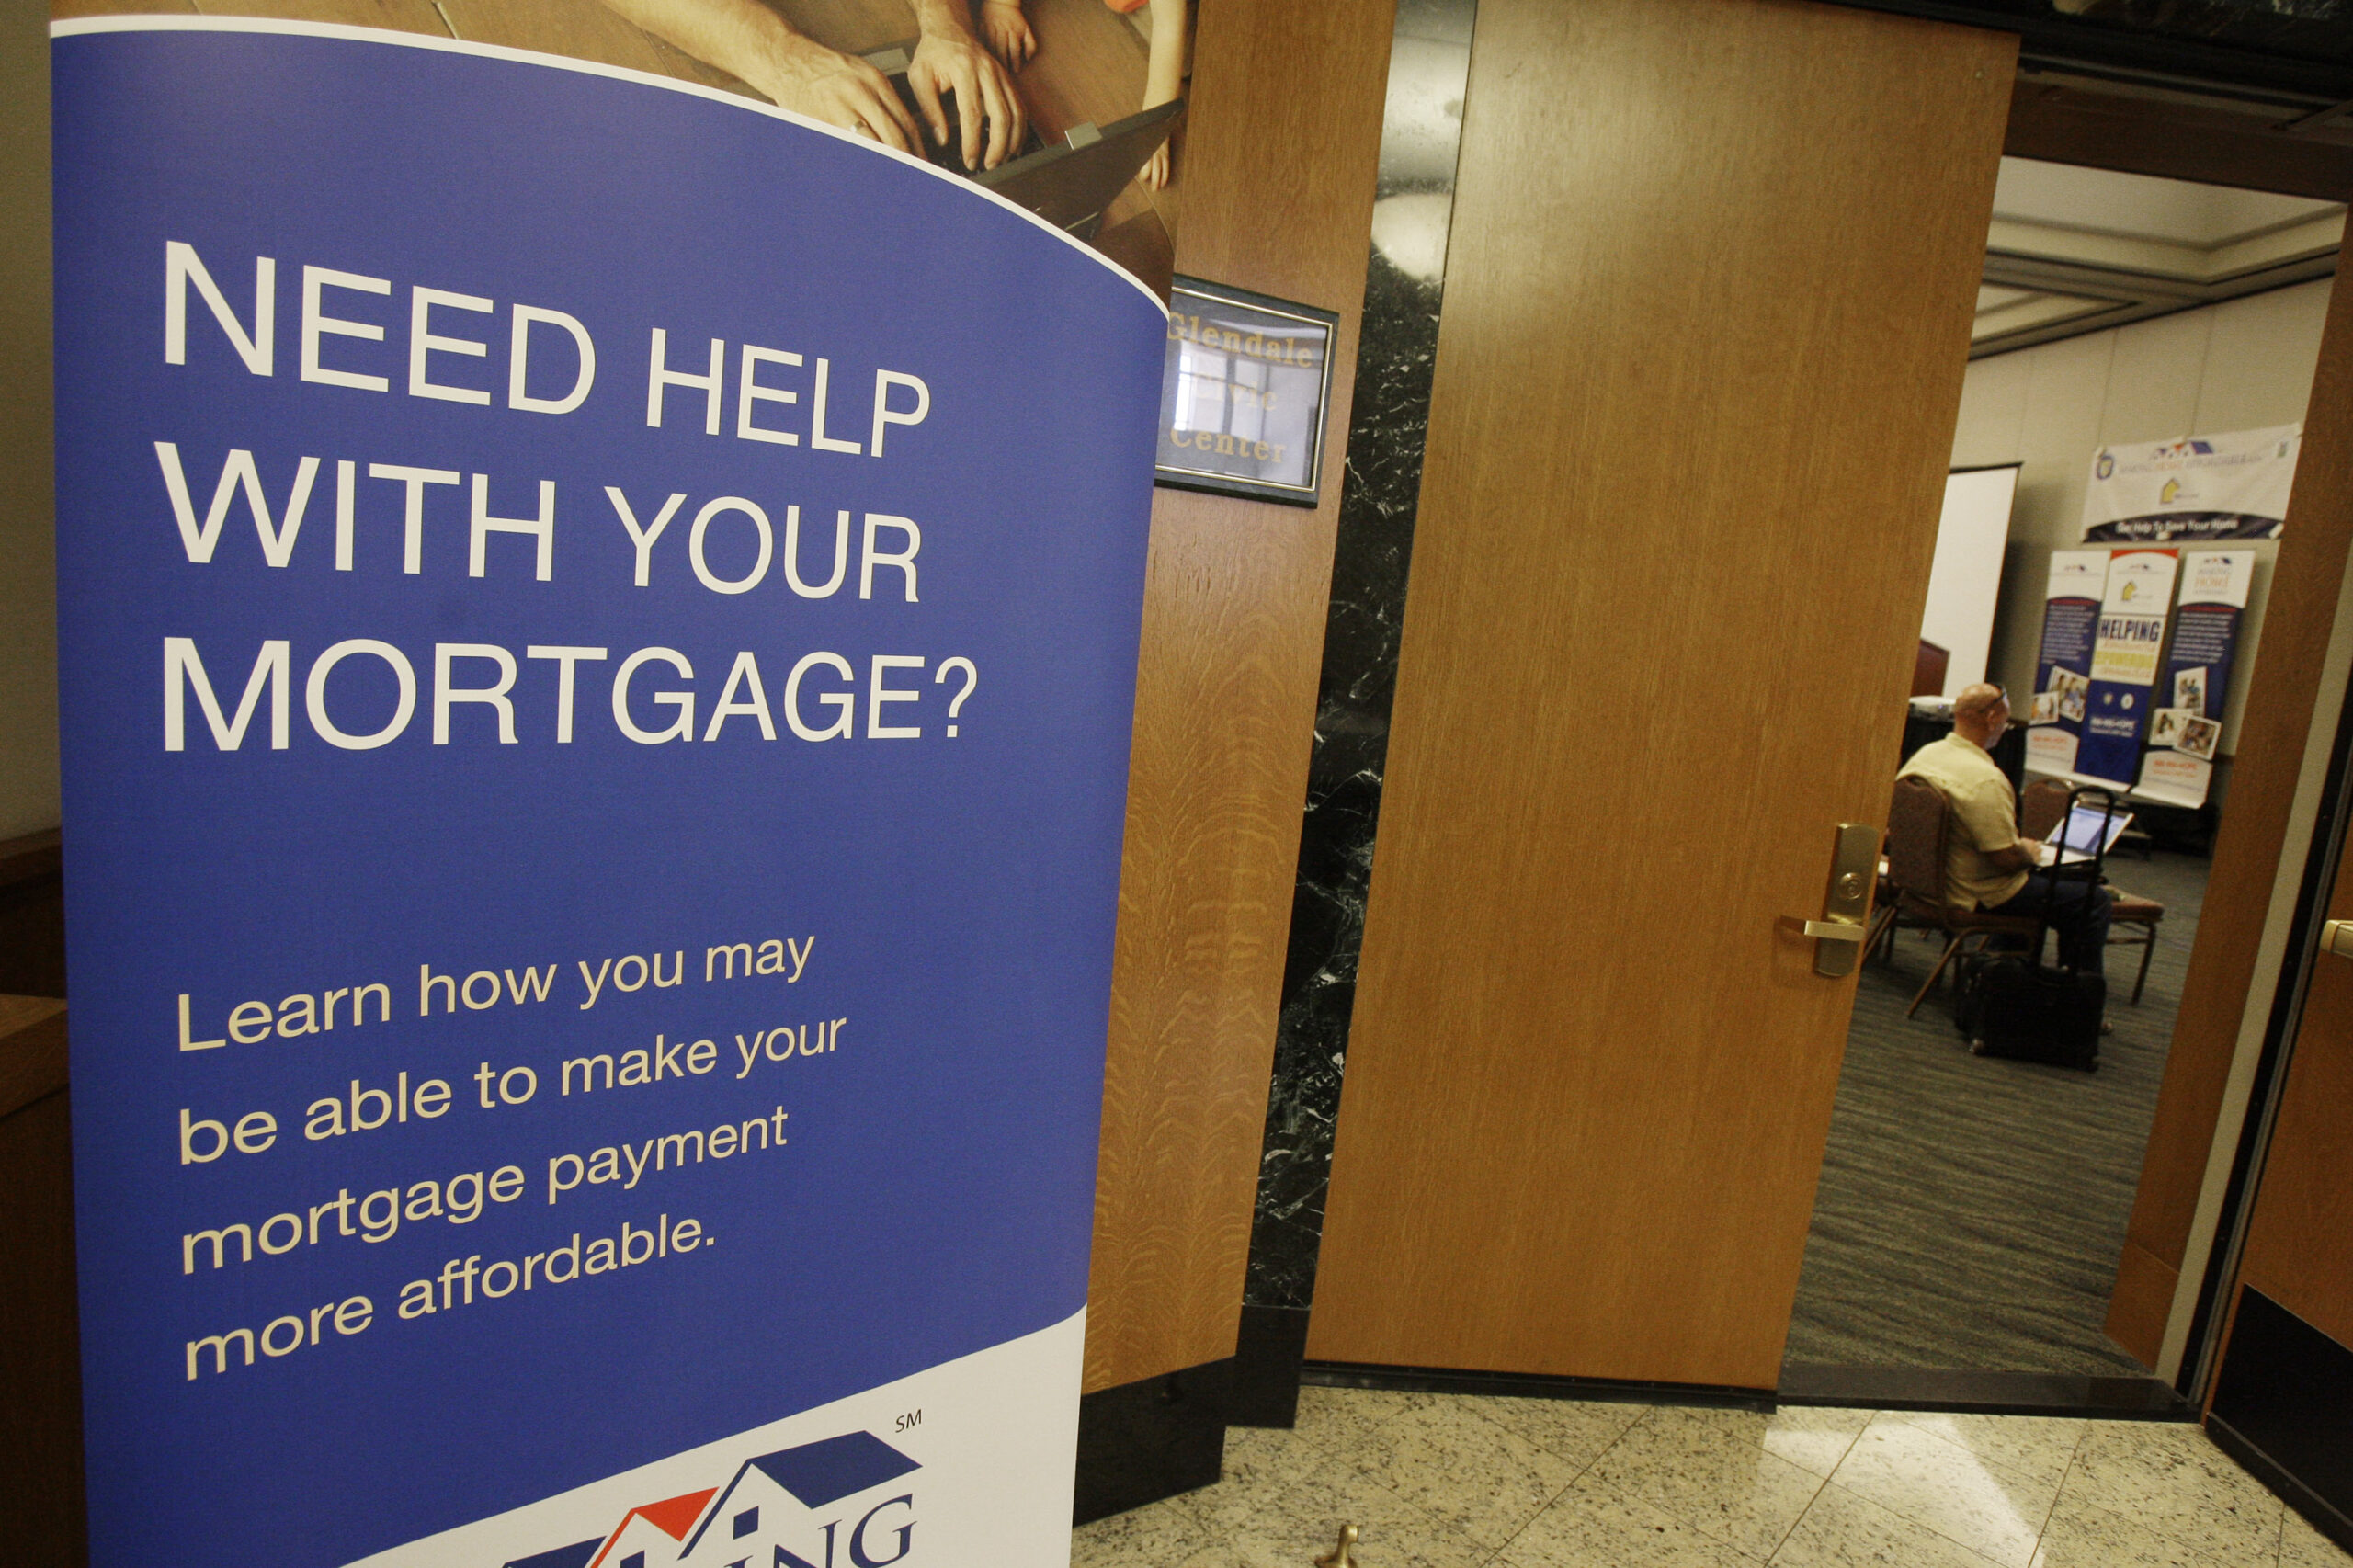 Mortgage help sign